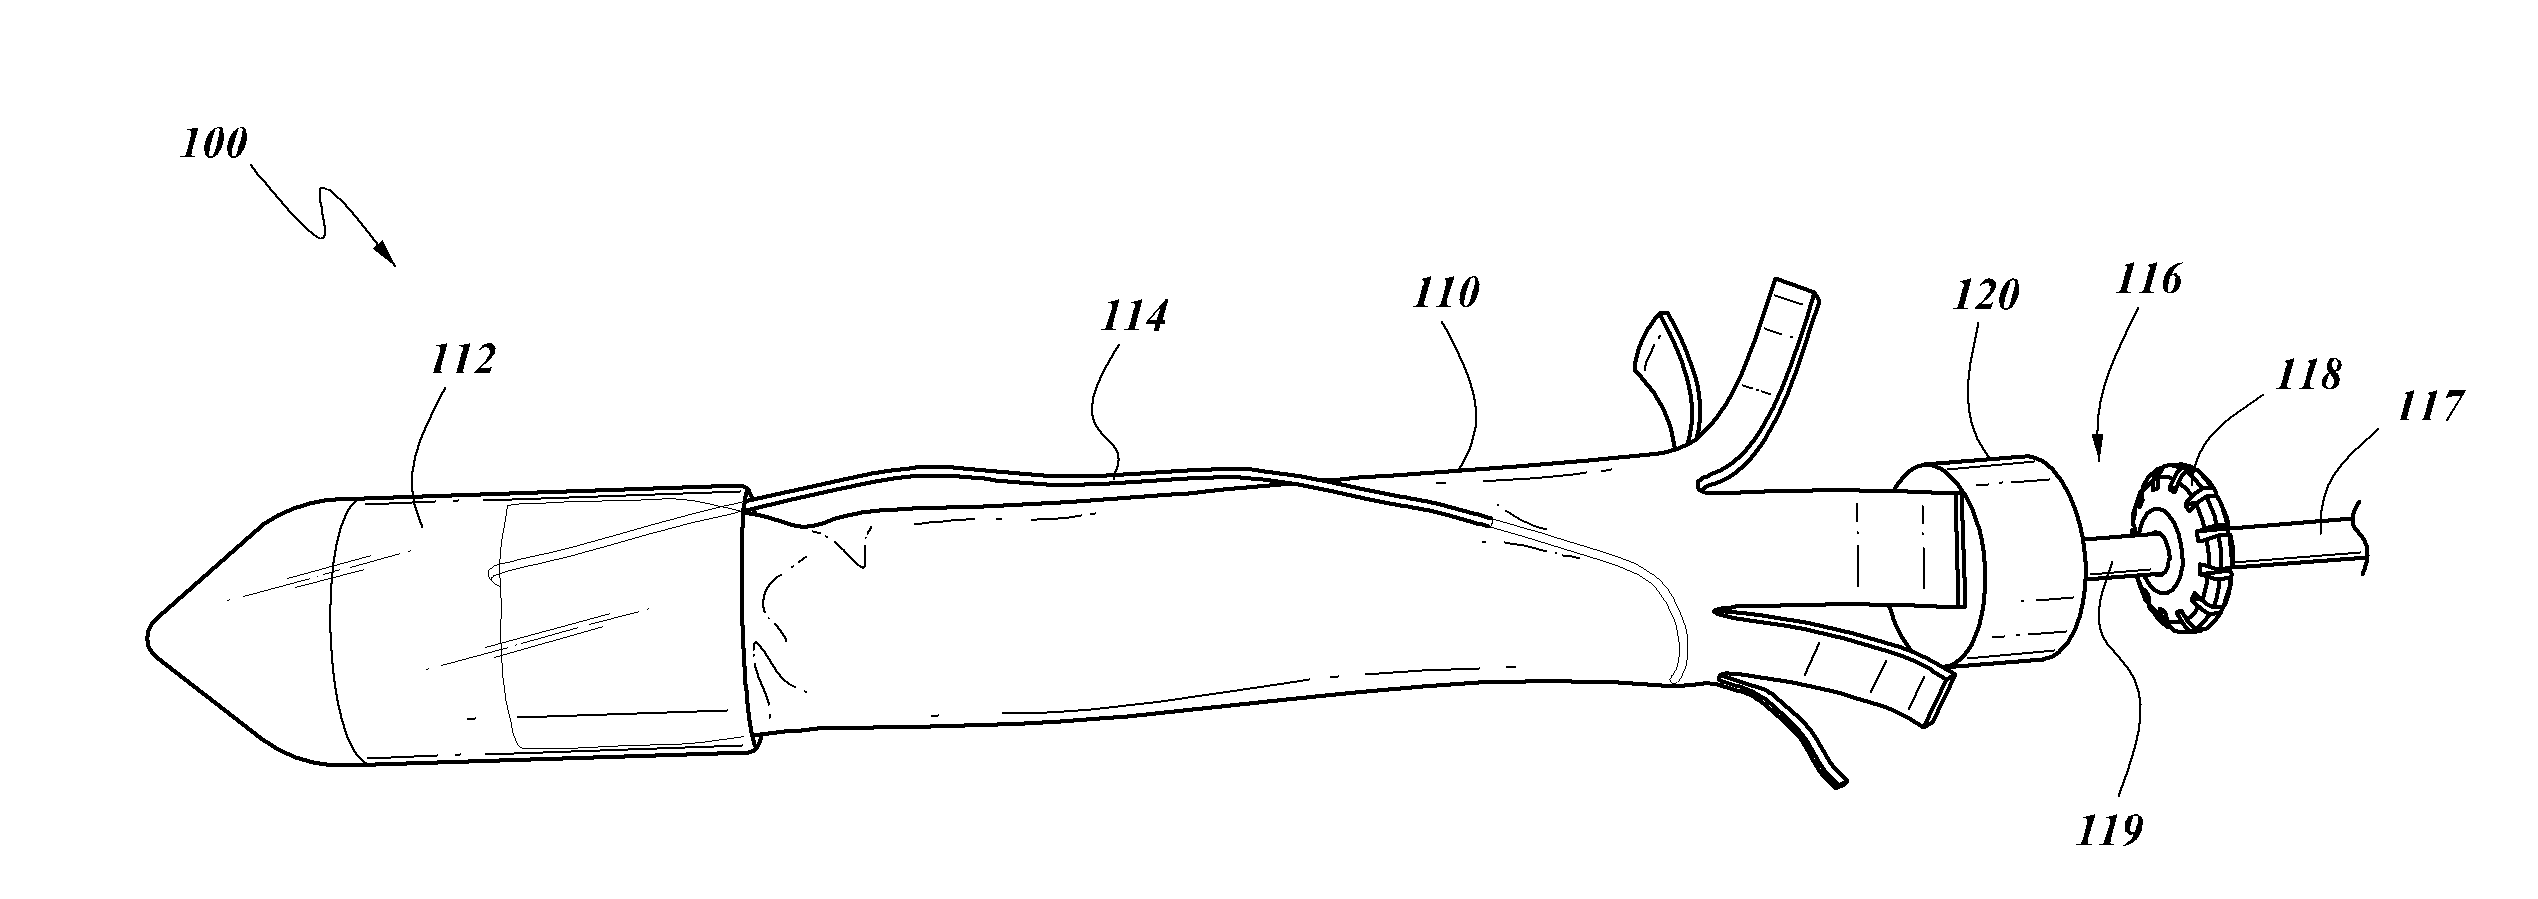 Prosthesis, delivery device and methods of use